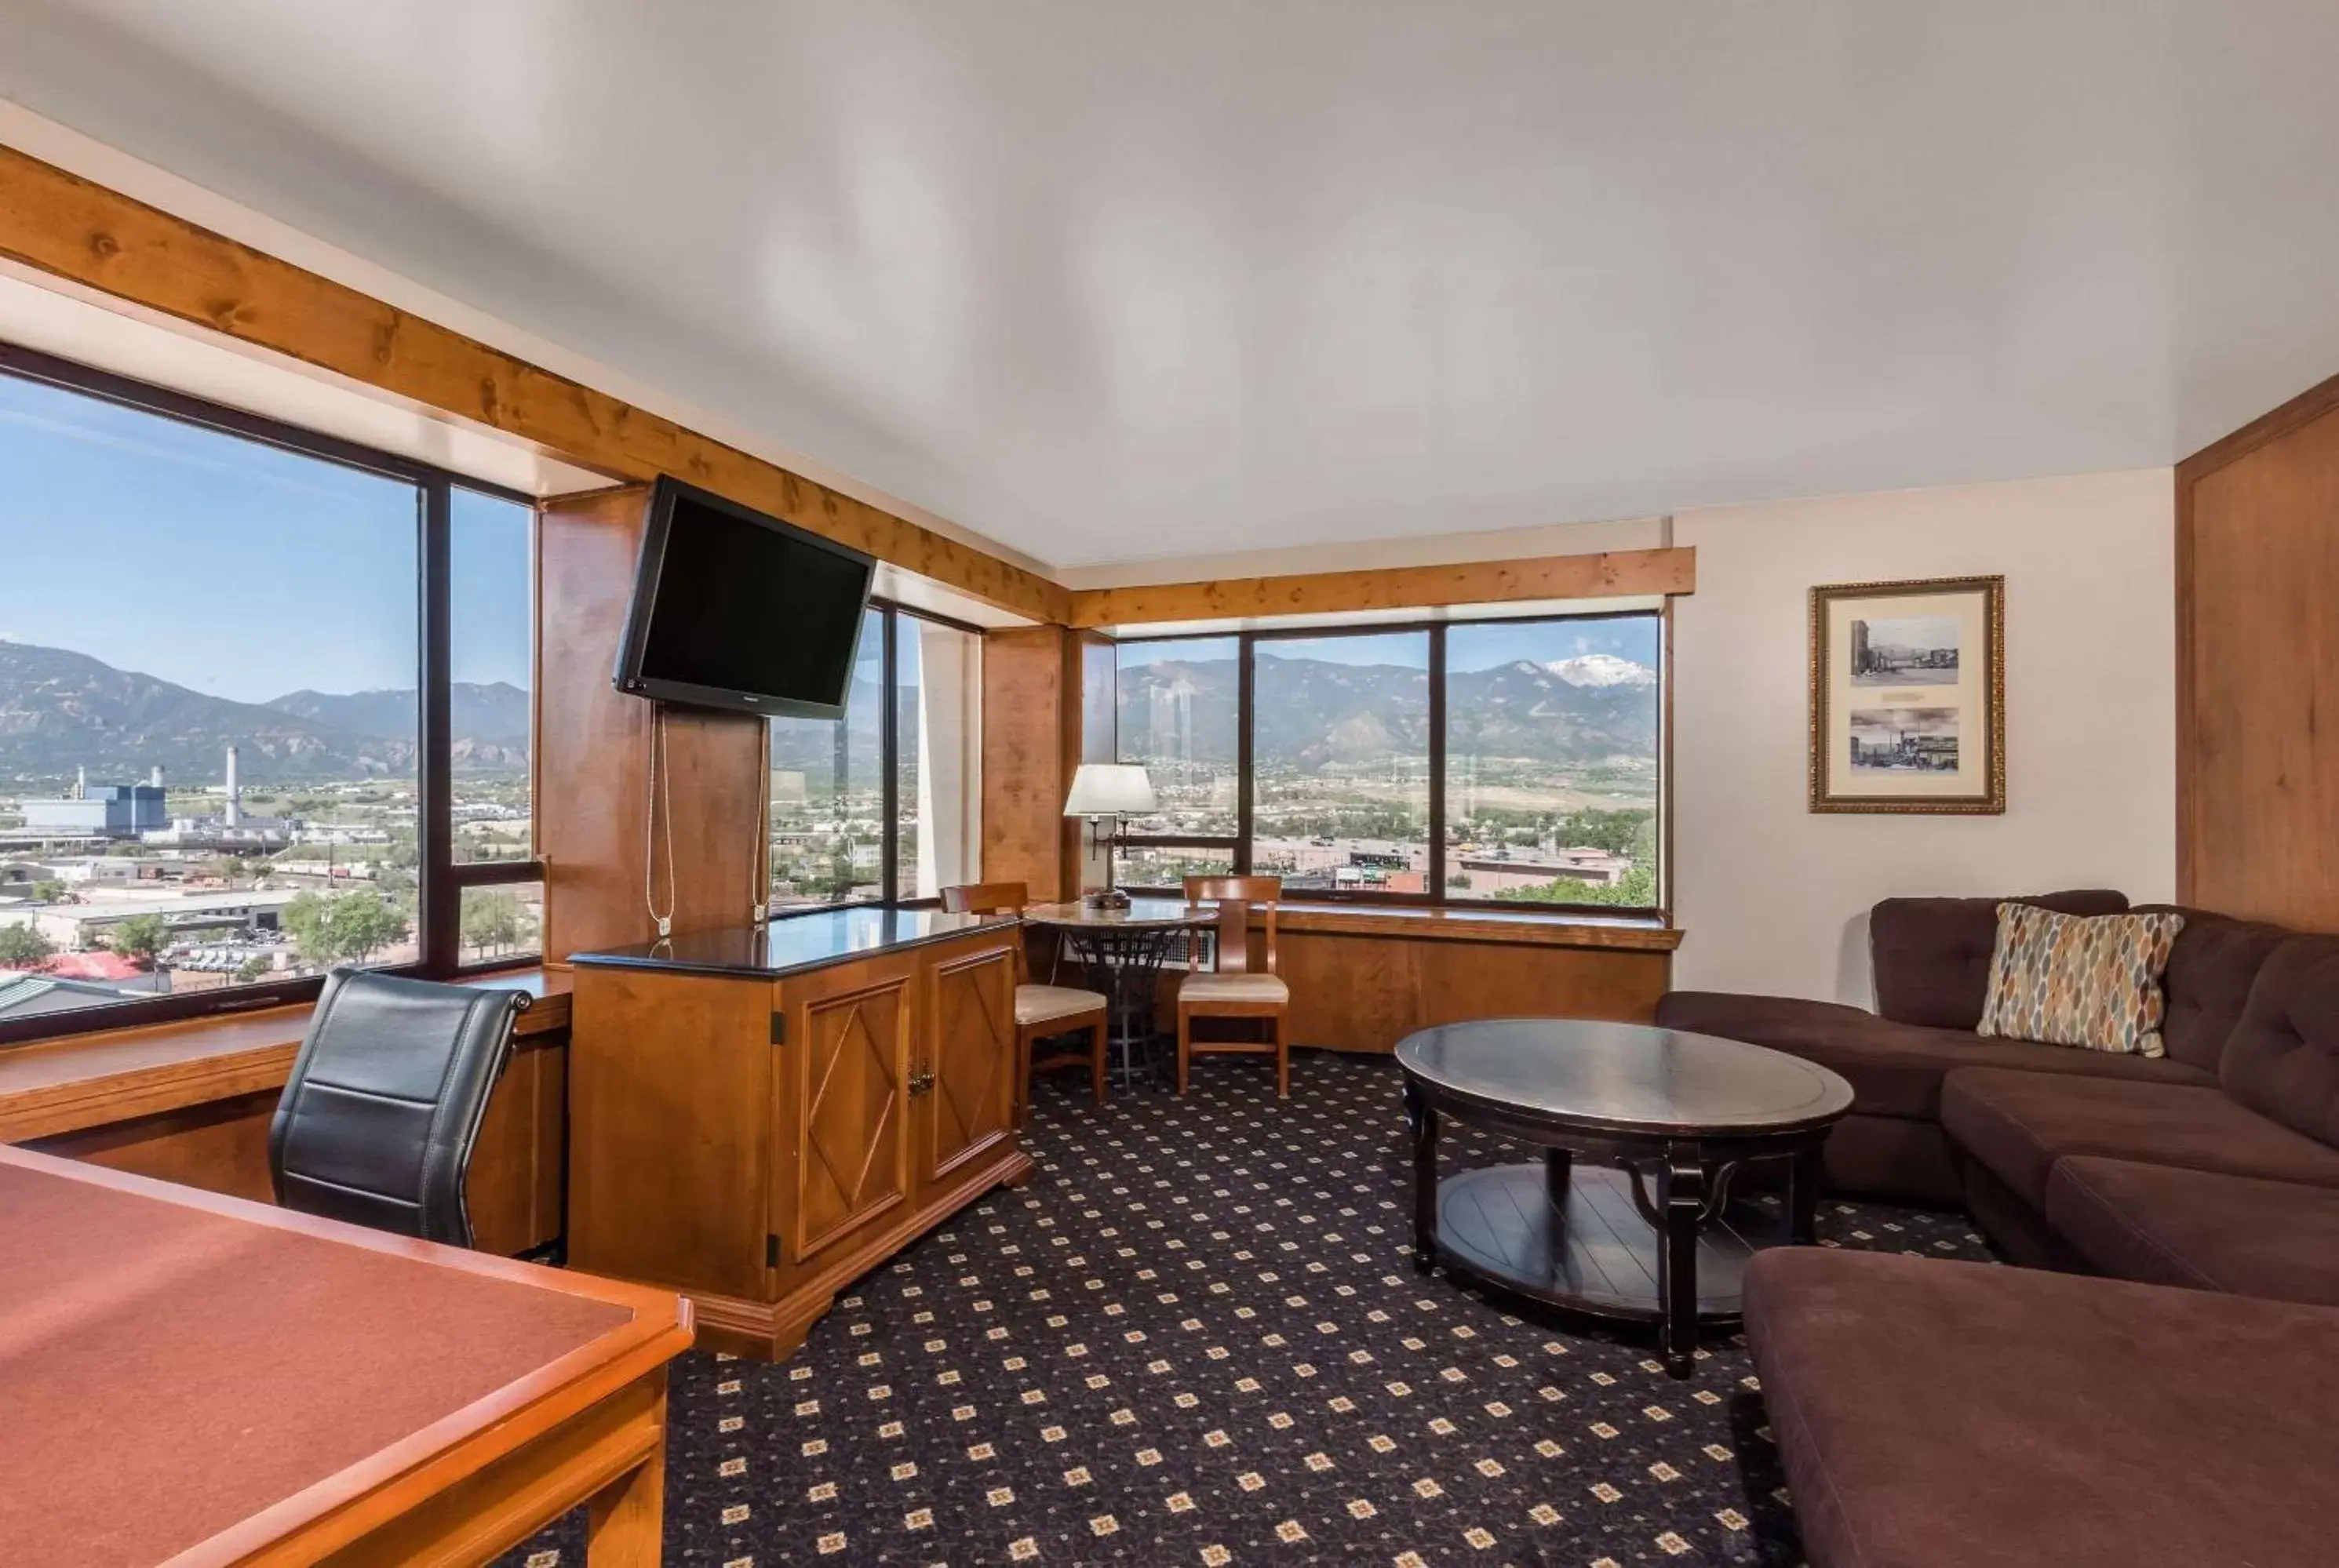 King Suite with Mountain View in The Antlers, A Wyndham Hotel